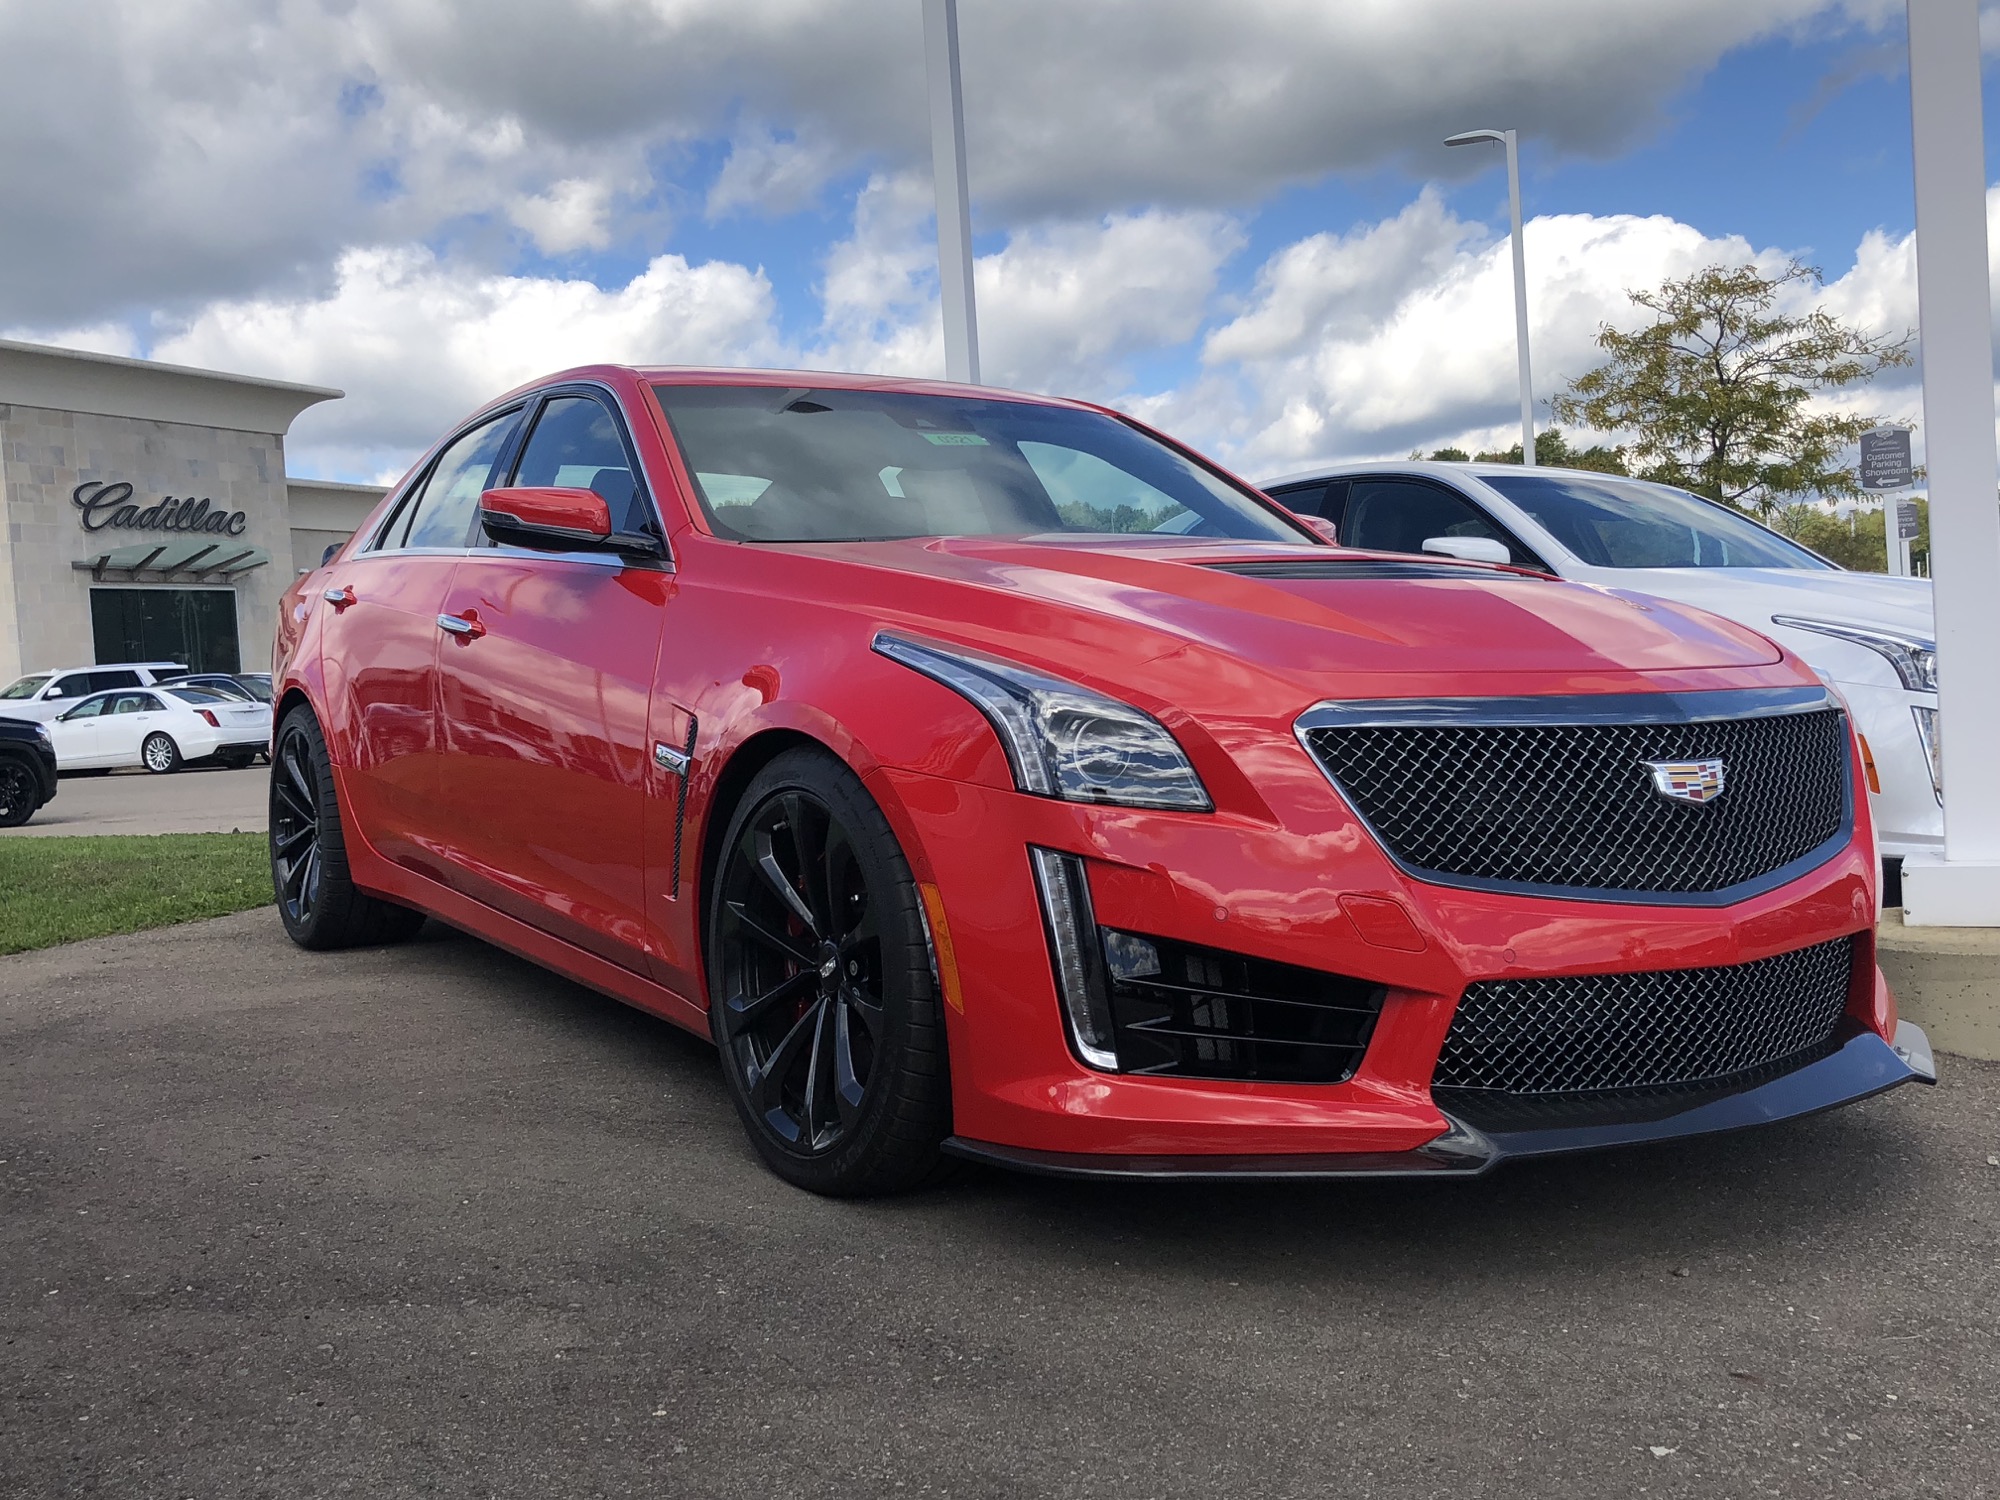 Lima Syndicate triathlon New Velocity Red Color For 2019 CTS-V: First Look | GM Authority